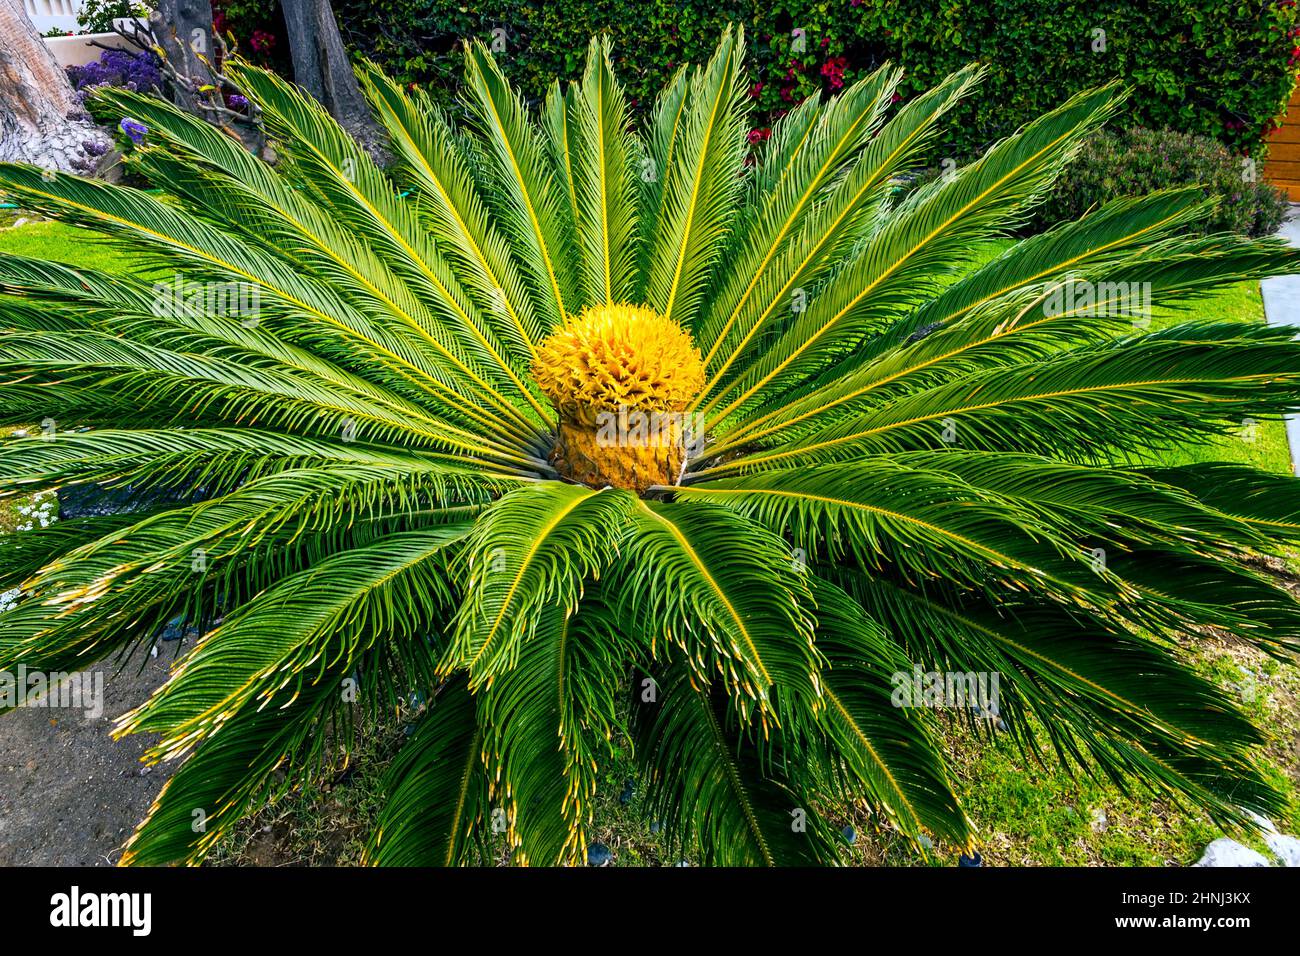 Flowerbed of palms in San Diego, California. Stock Photo